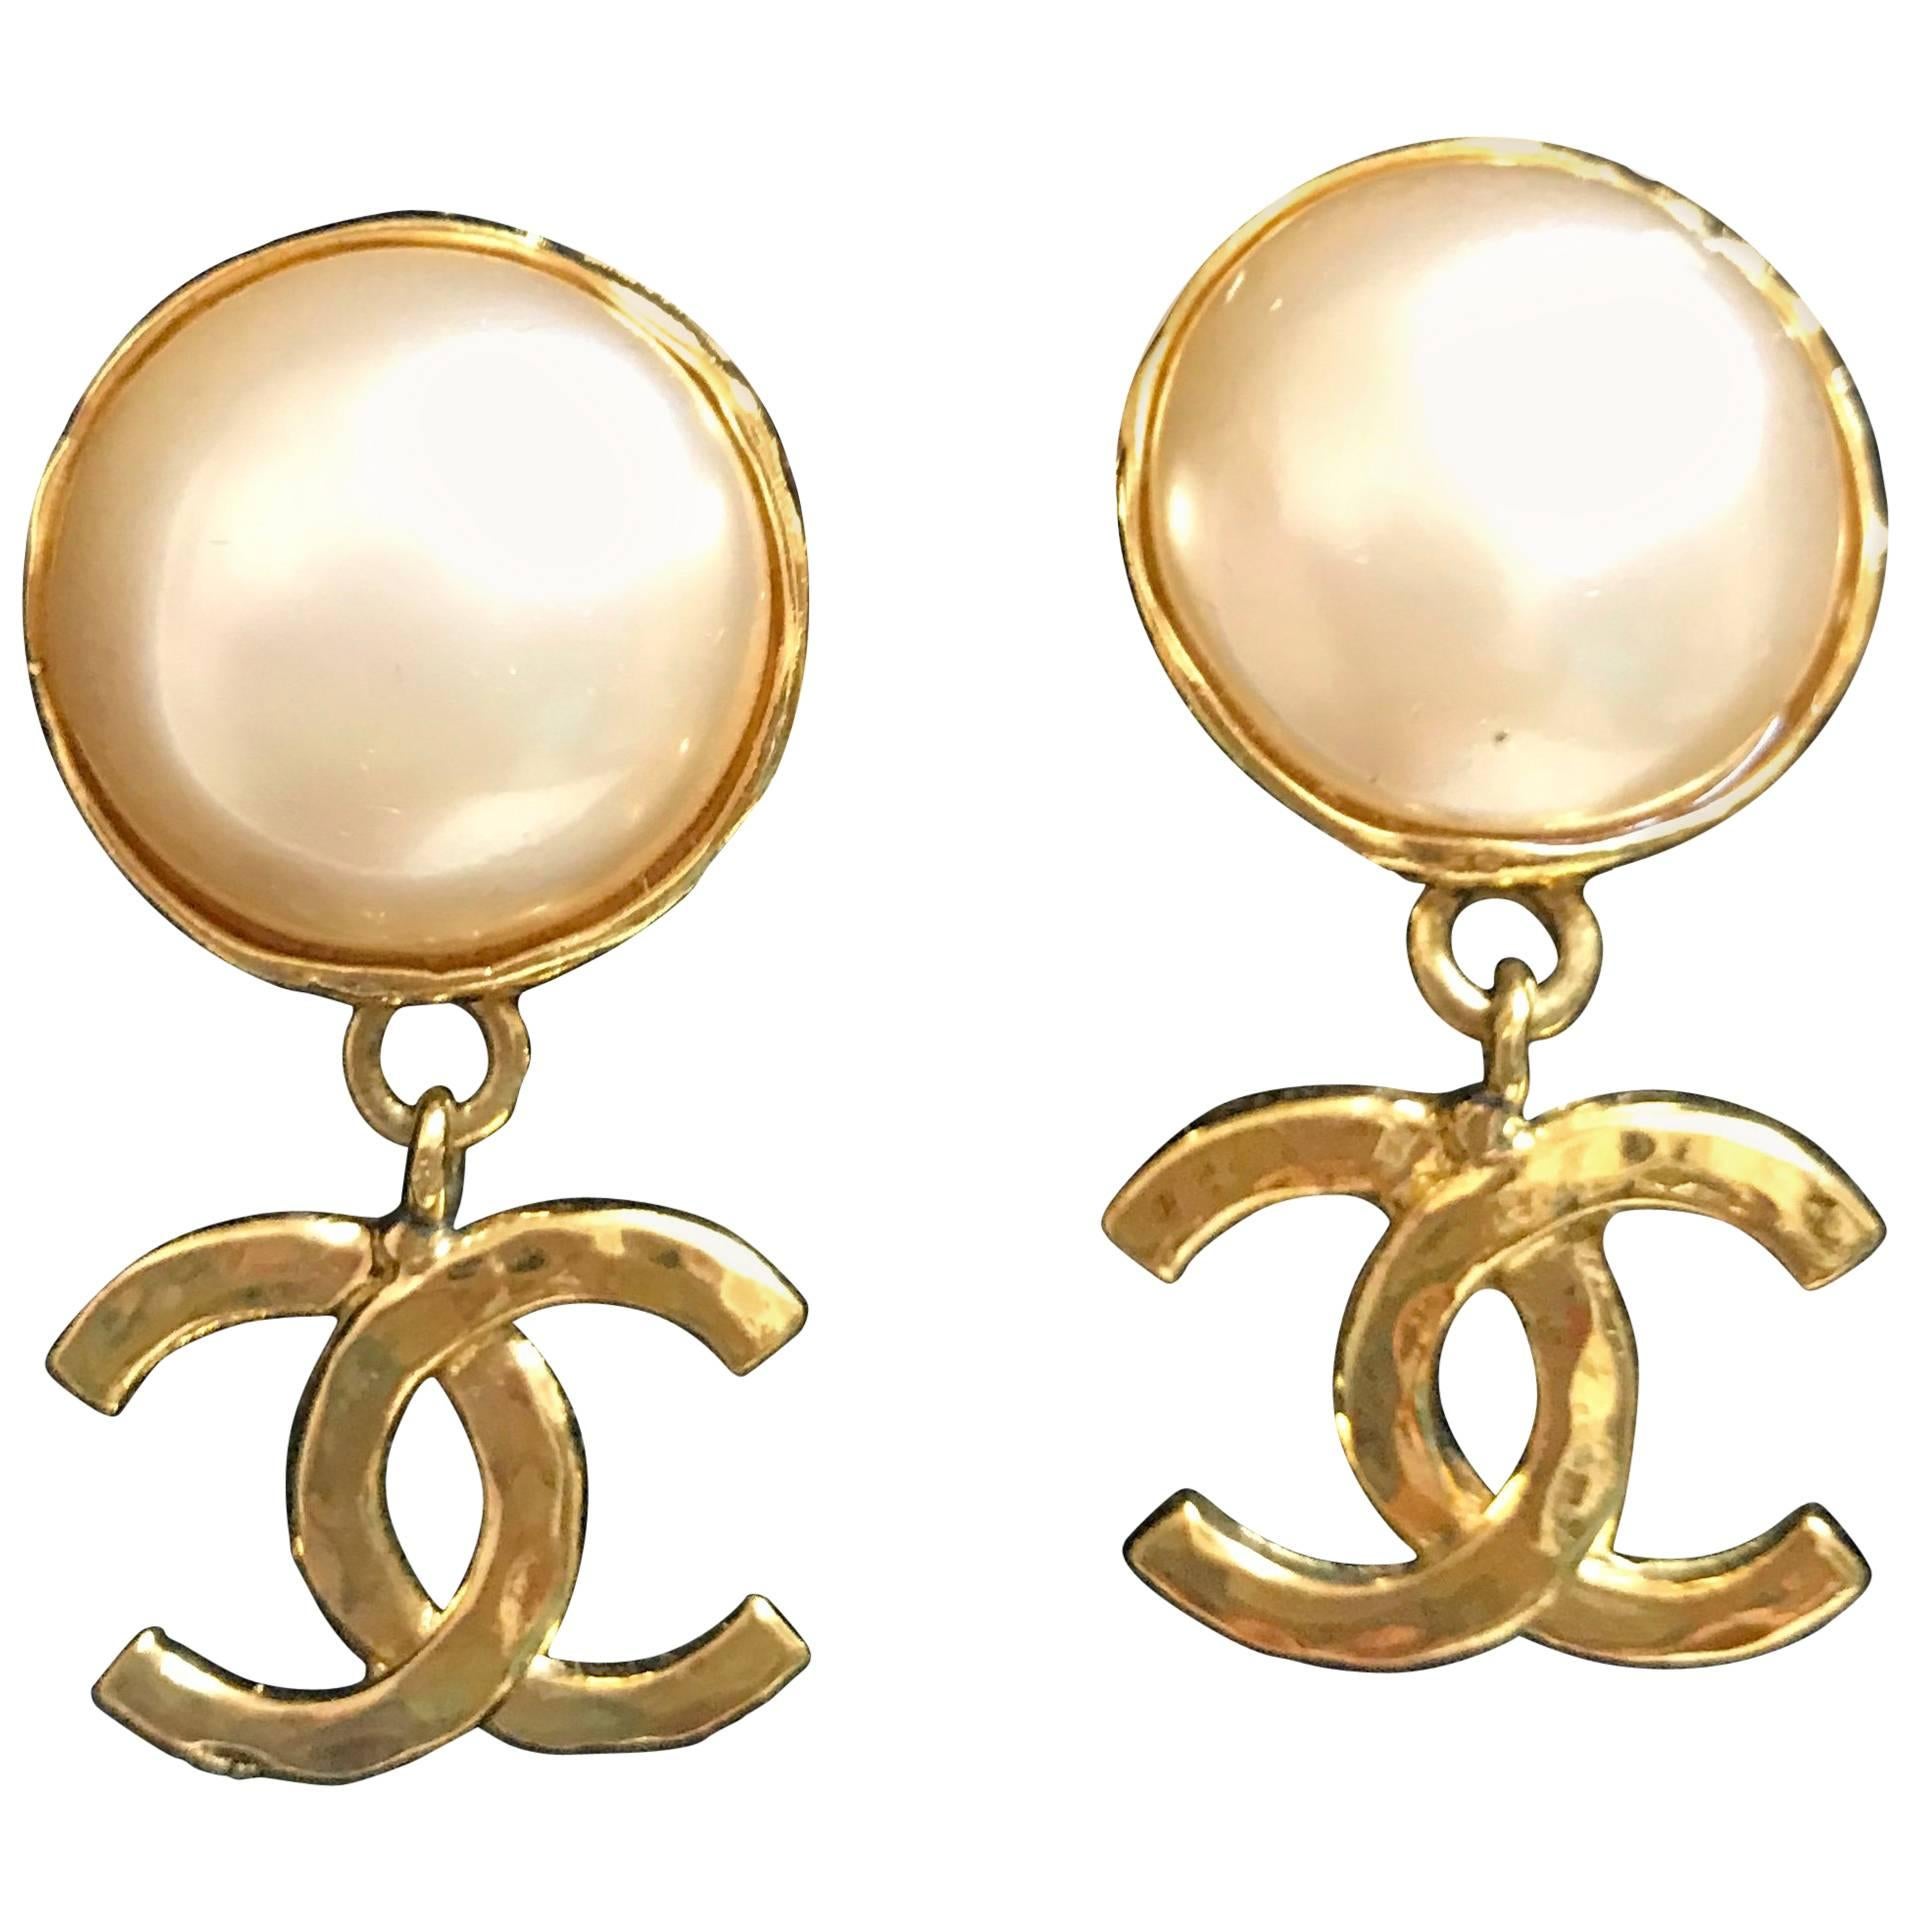 Vintage CHANEL classic round white faux pearl and golden CC dangling earrings.